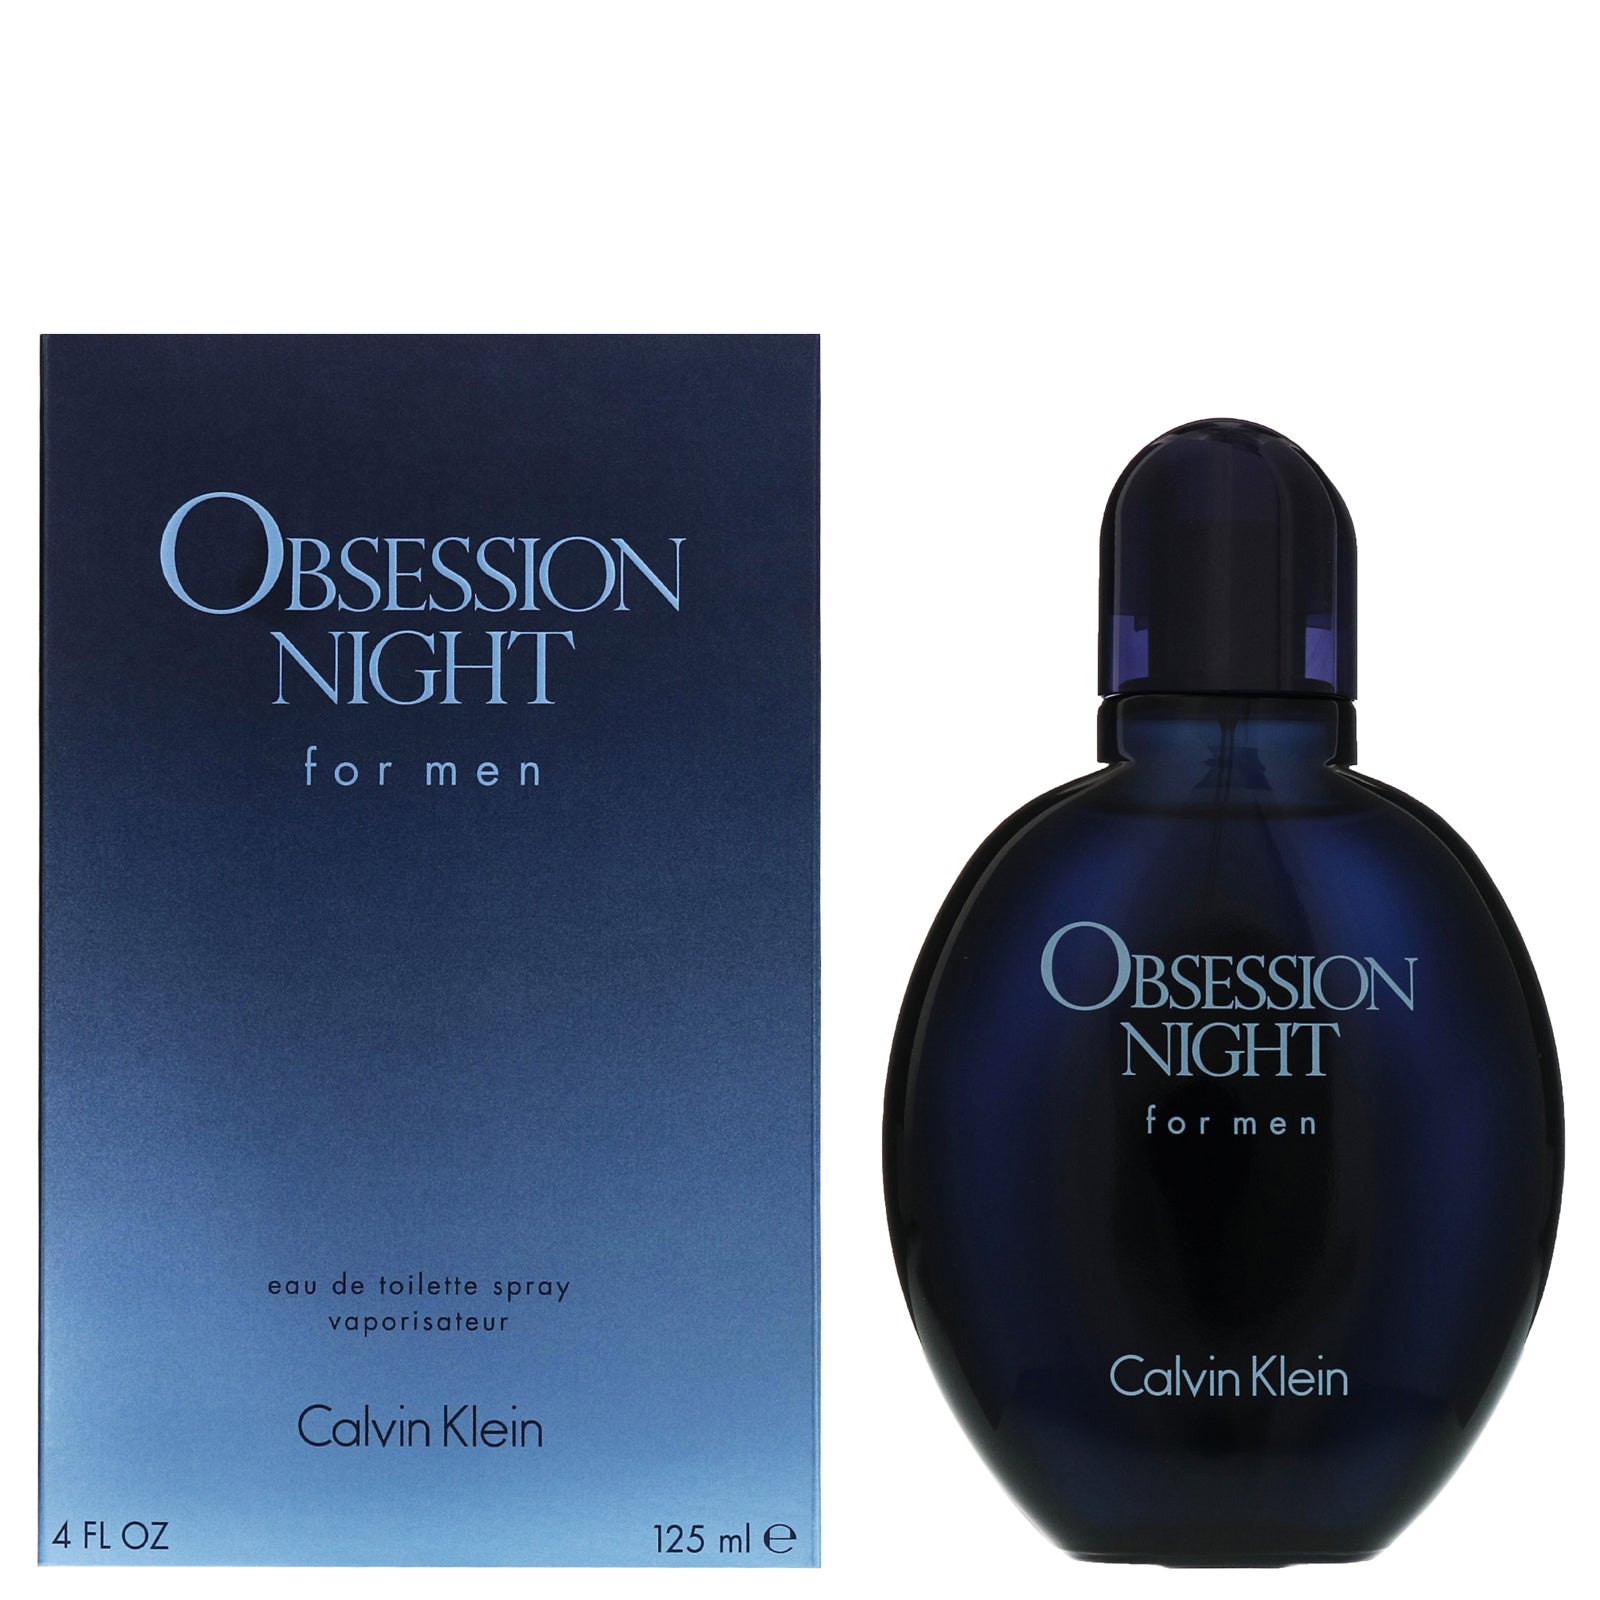 CK Obsession Night EDT for Men | Perfume Planet